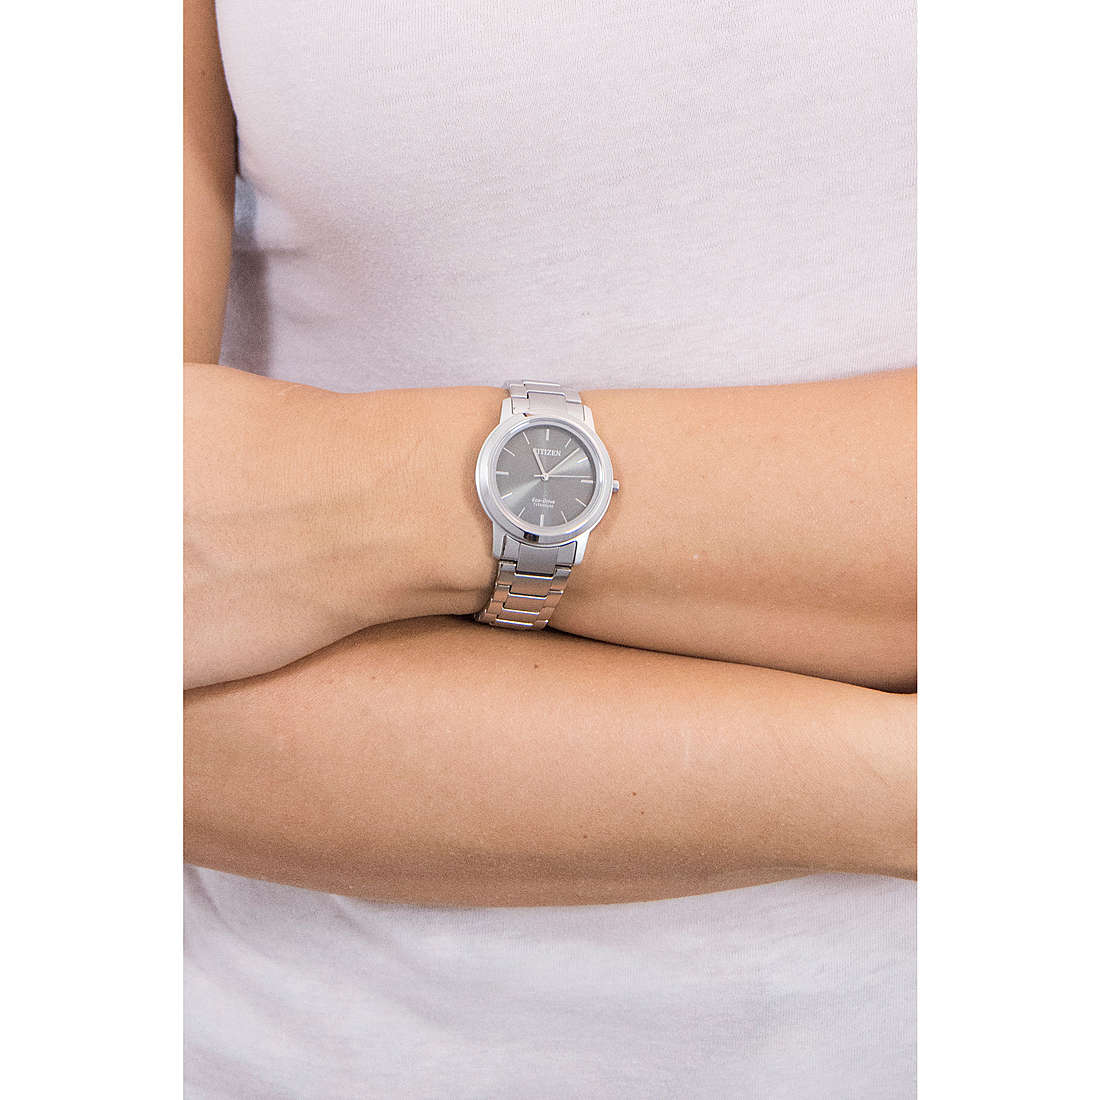 Citizen only time Super Titanio woman FE7020-85H wearing